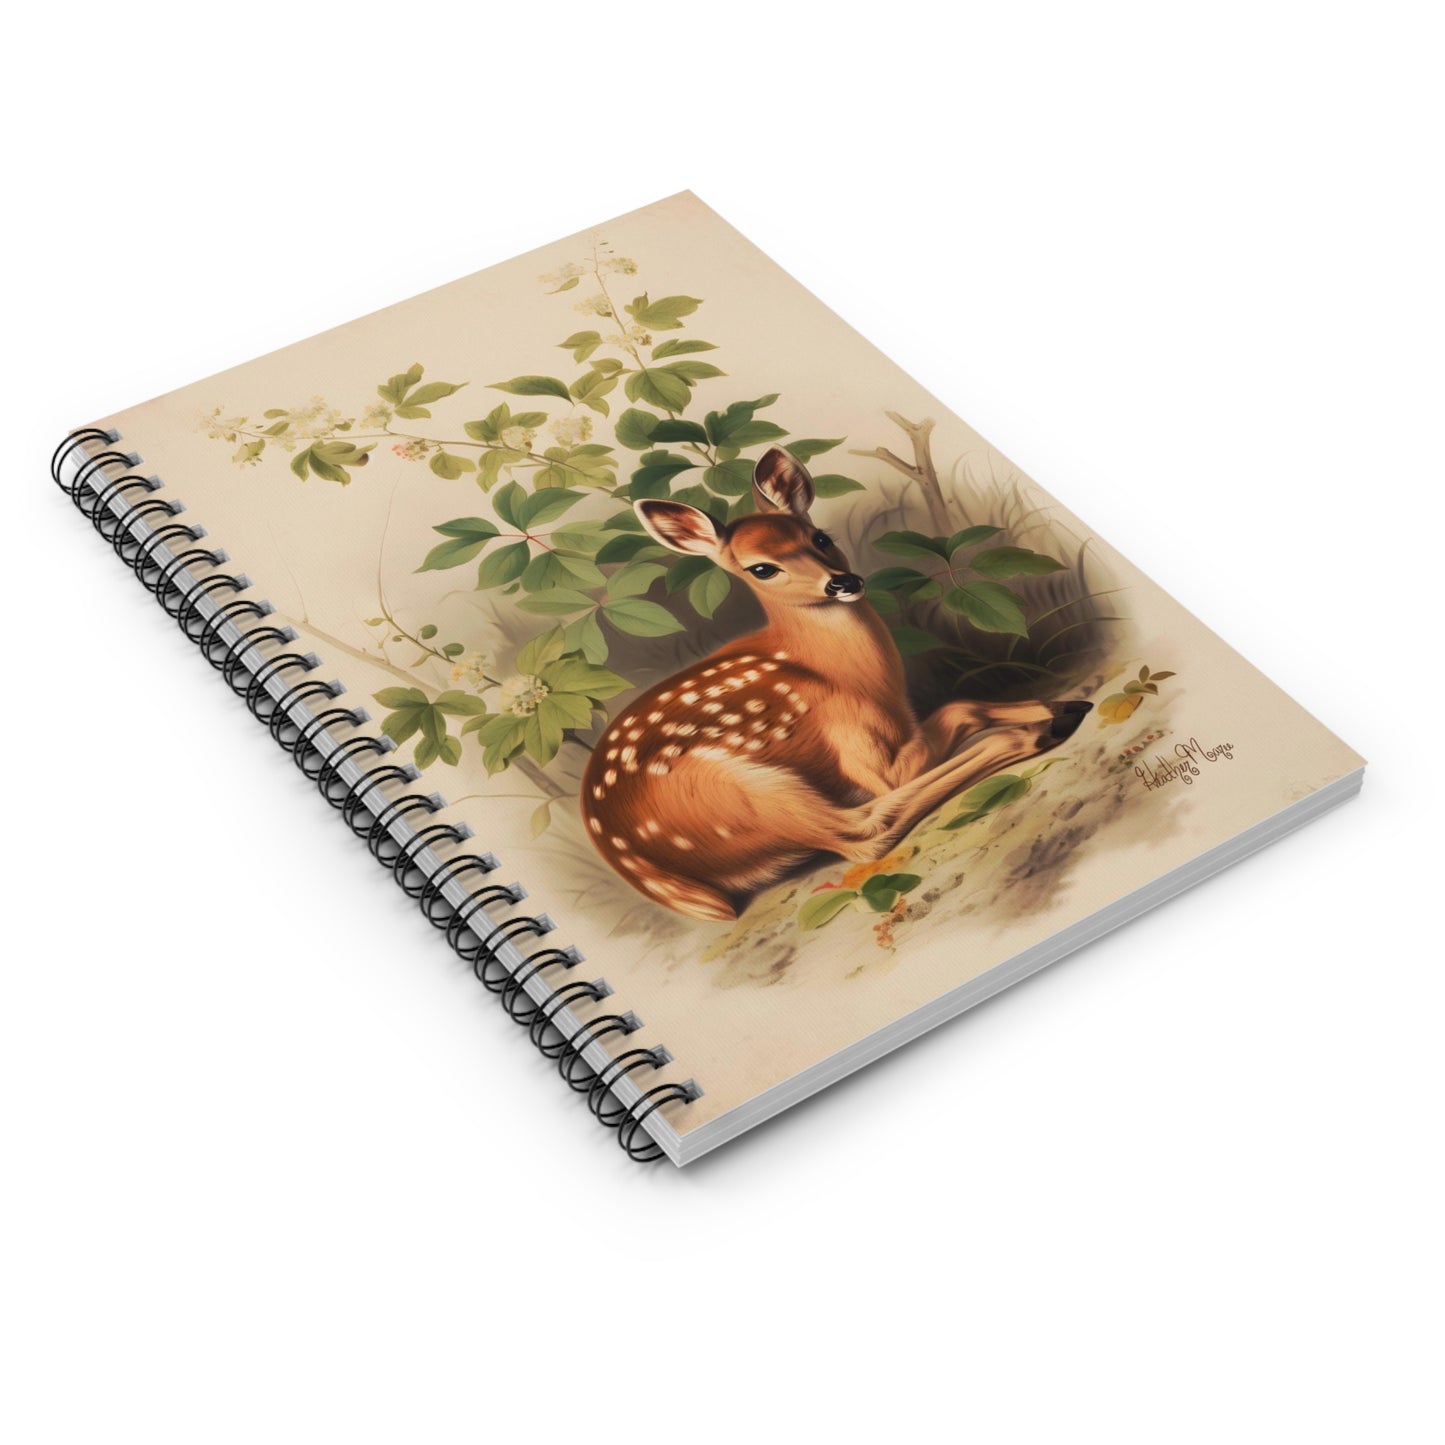 Lounging Fawn in Foliage | Ruled Line Spiral Notebook